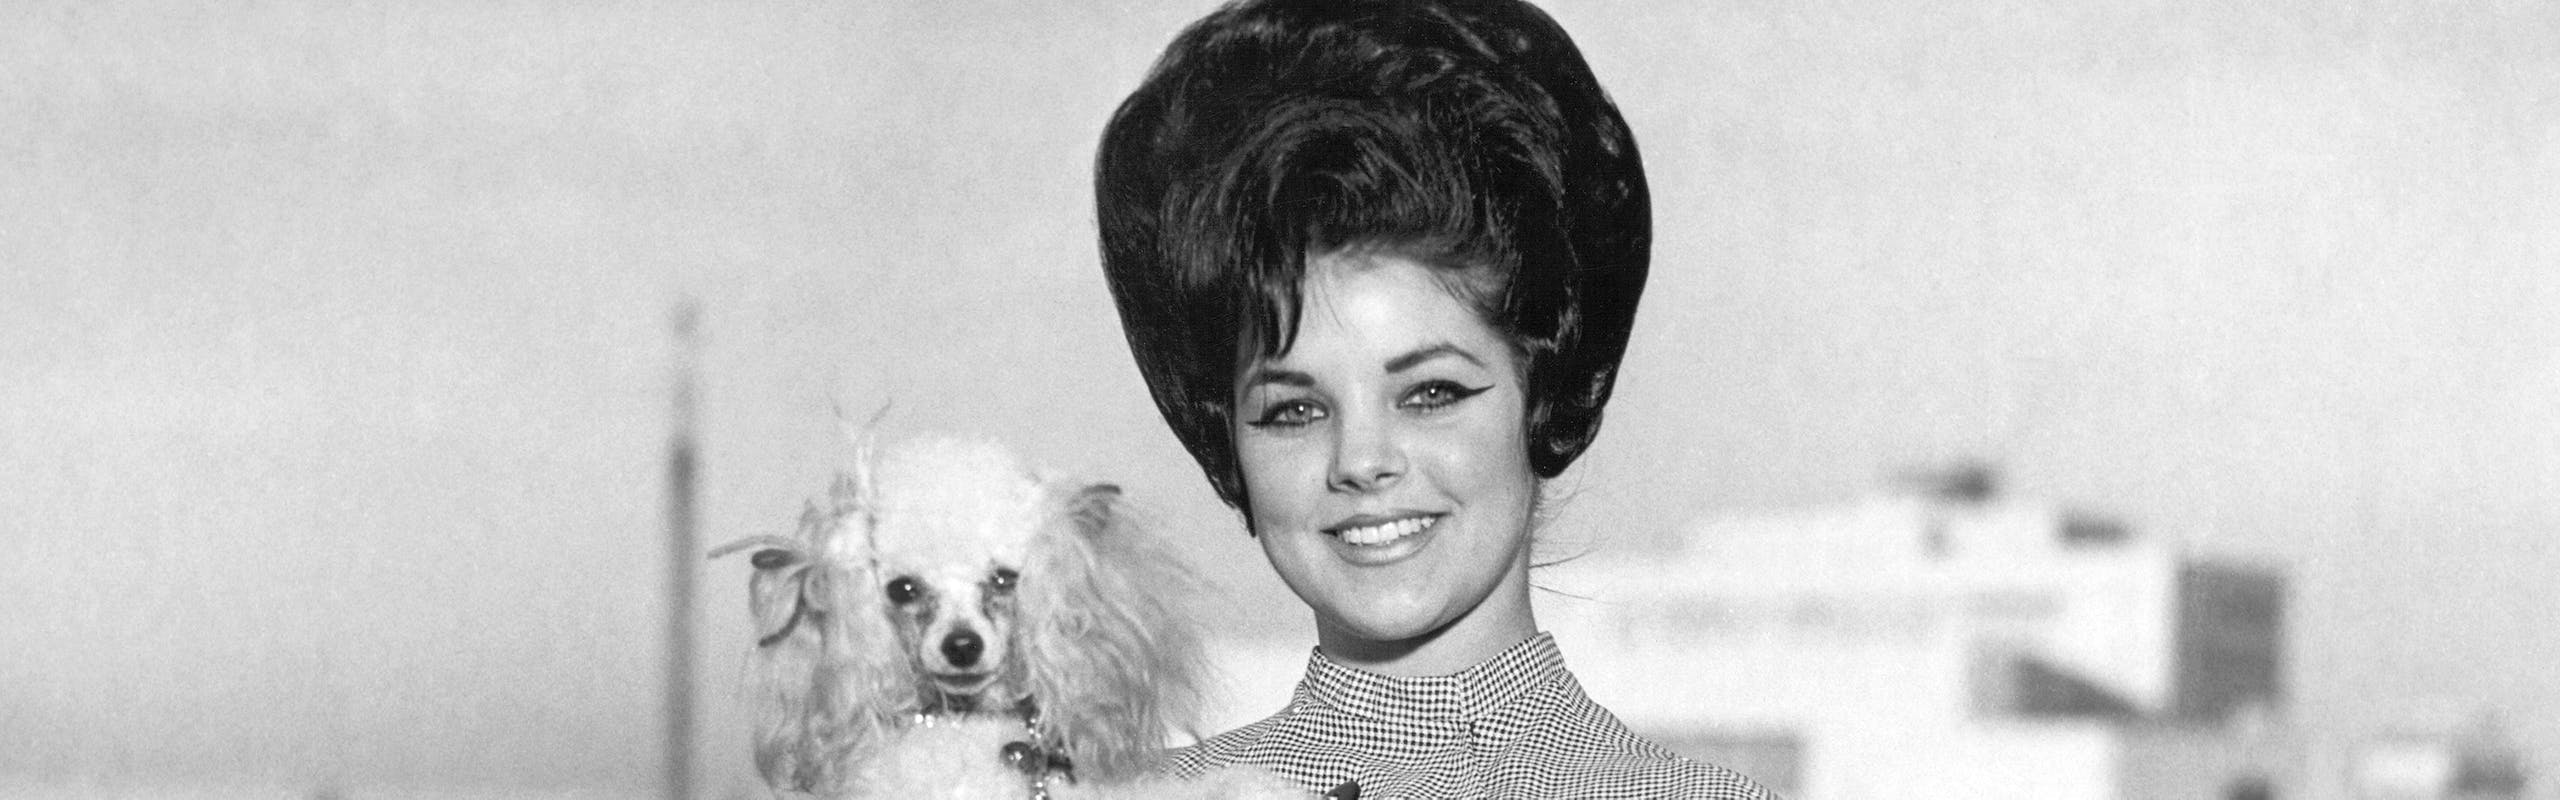 Priscilla Presley Young with dog and gloves